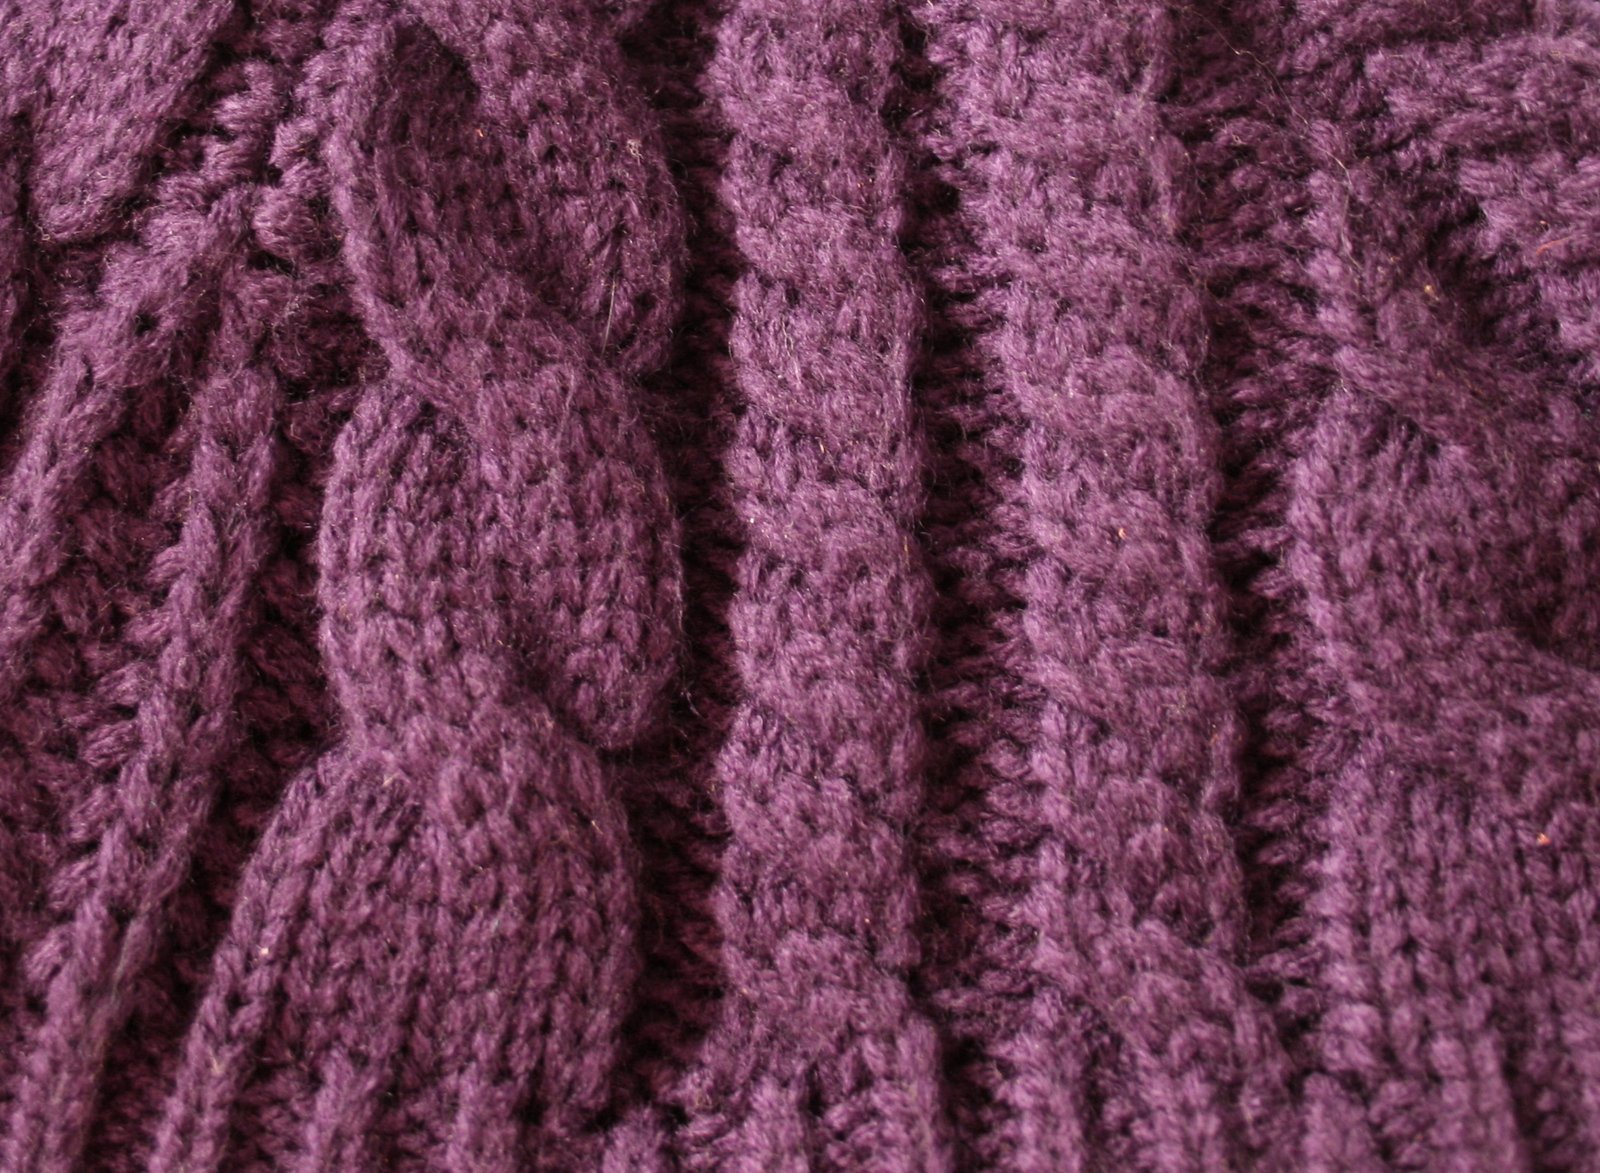 purple knitted fabric with intricate stitches made by a young person